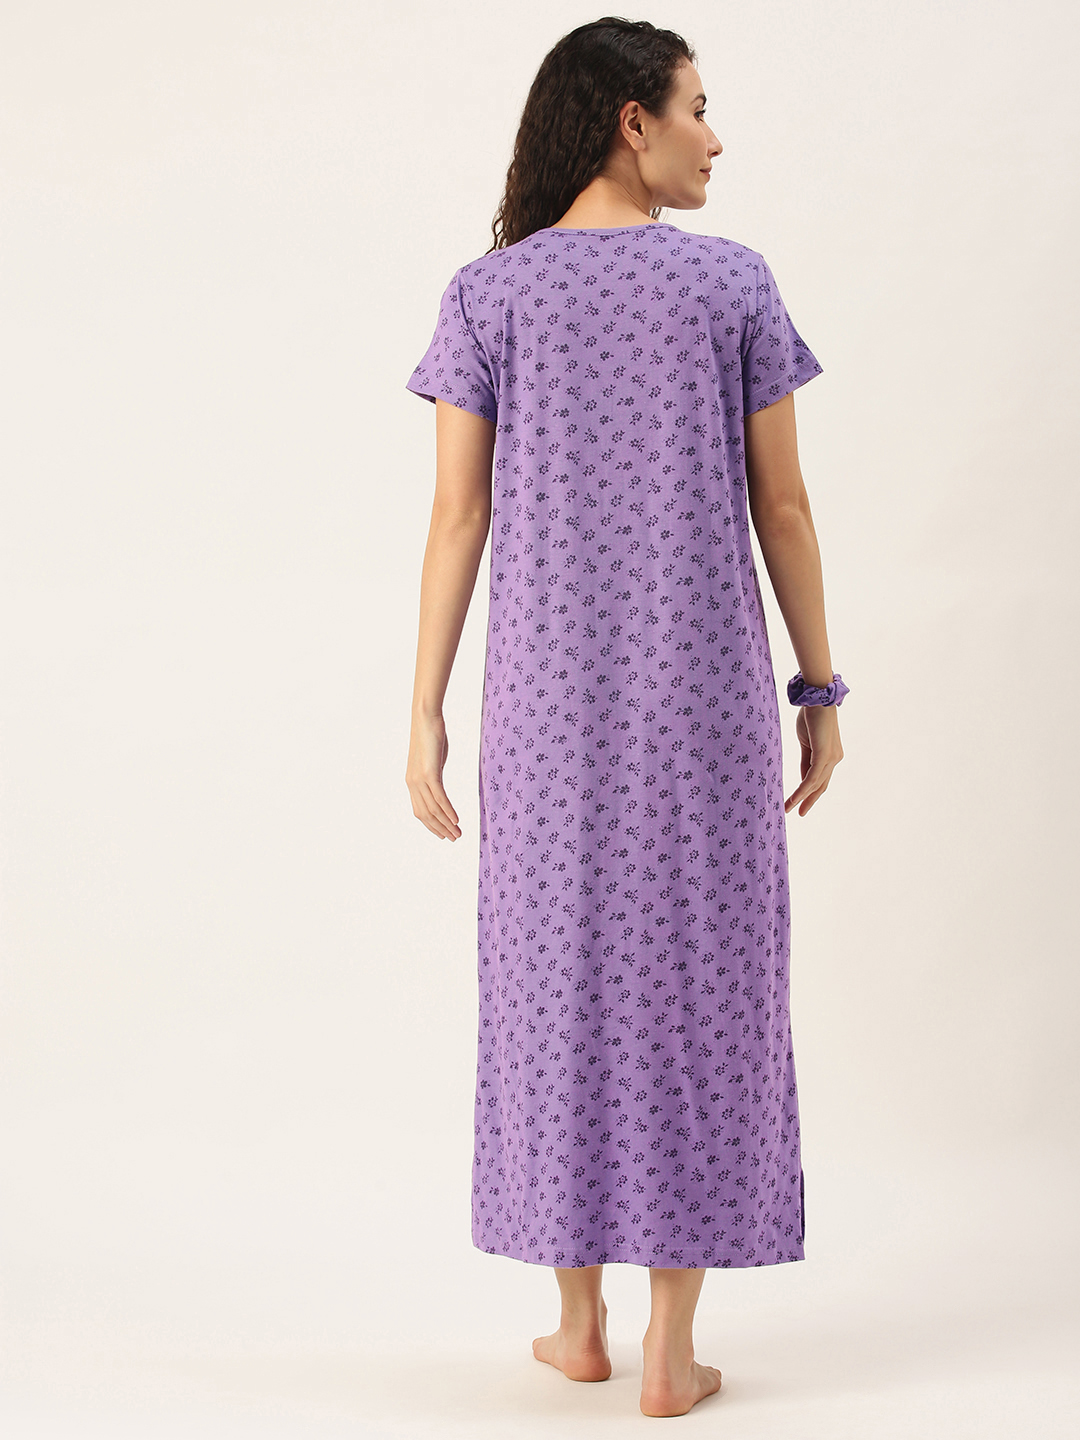 Slumber Jill Violet all over Print Nightdress with scrunchie